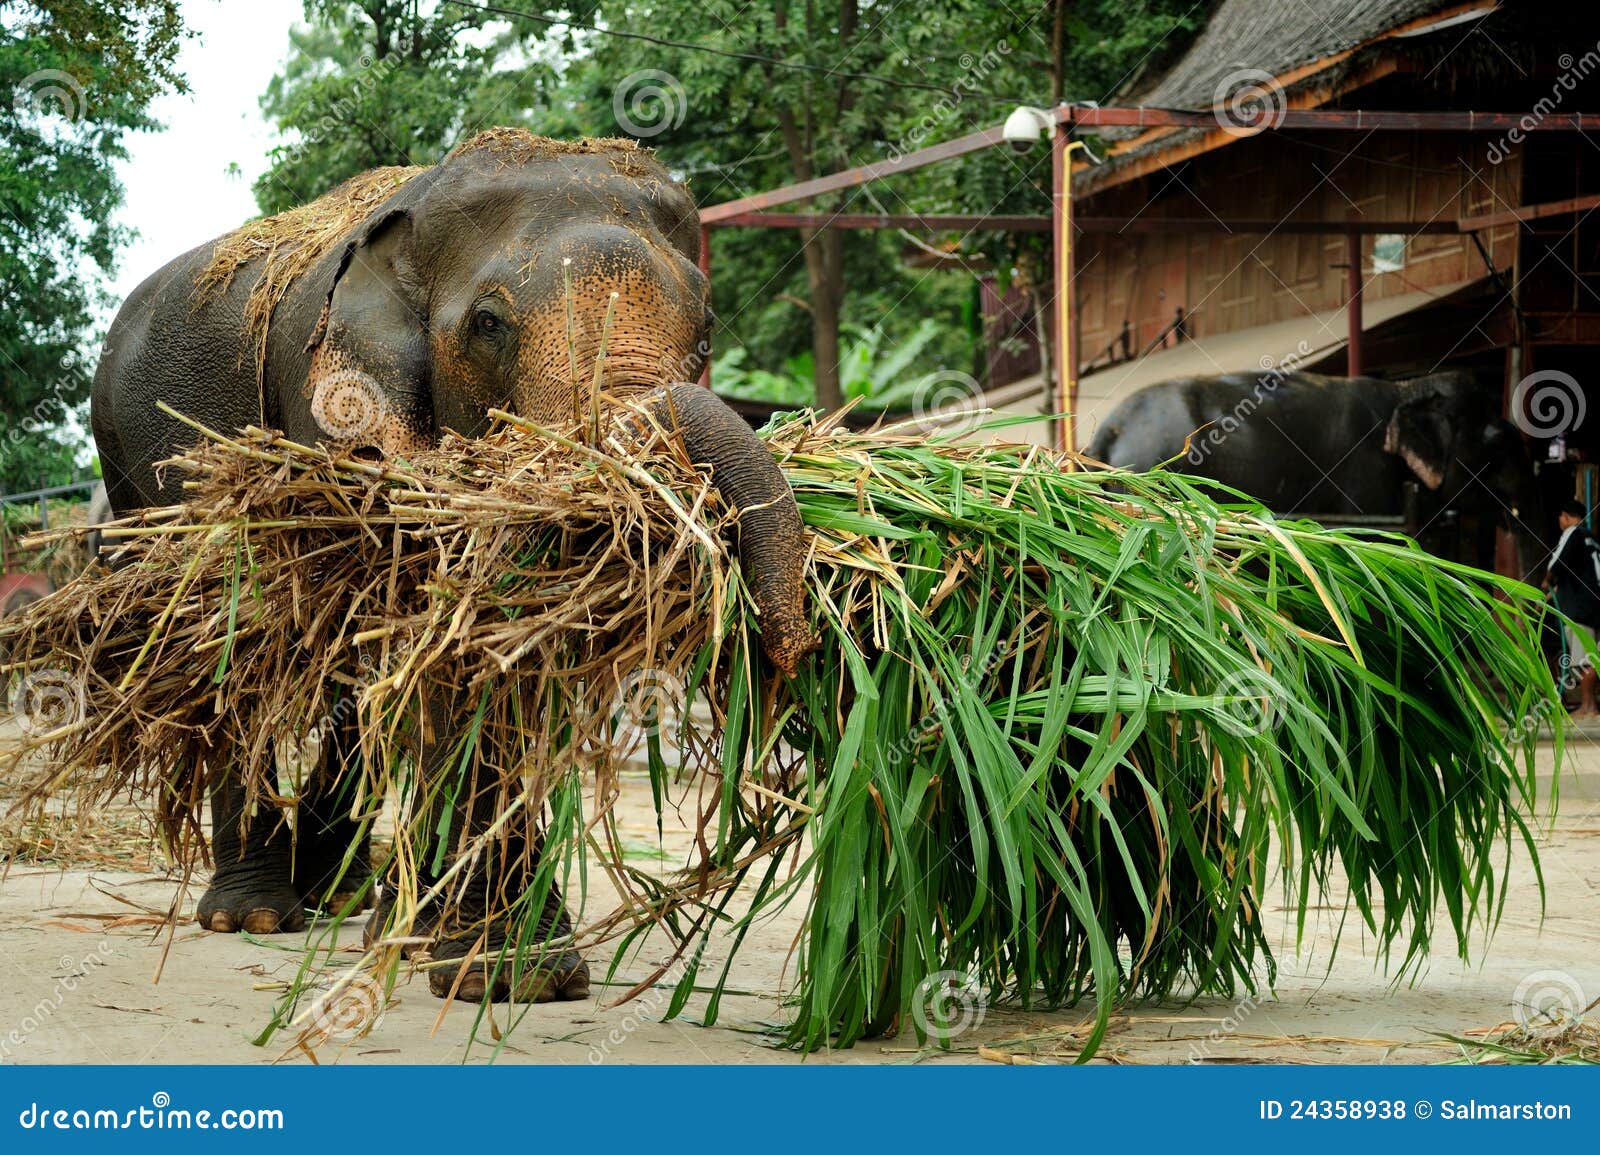 Large Working Elephant Transporting Silage. Large working Asian bull elephant being used to transport agricultural silage